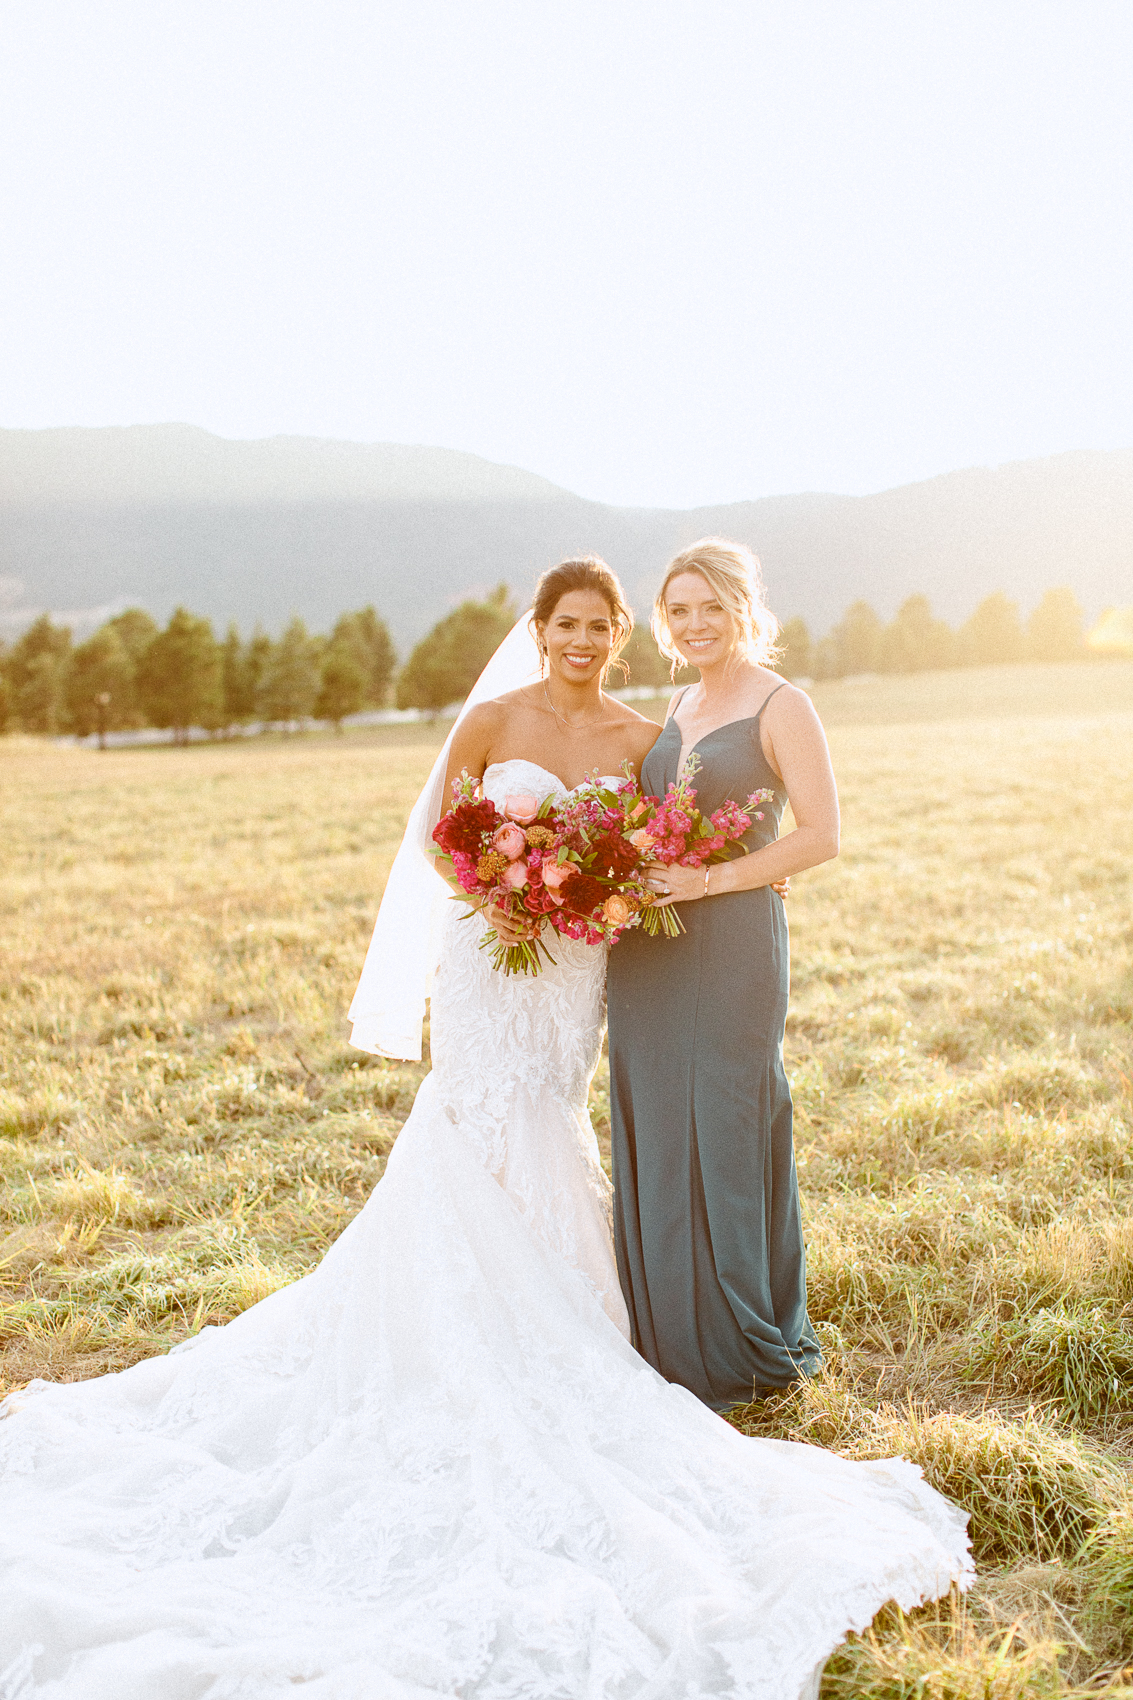 Bridal portraits at spruce mountain